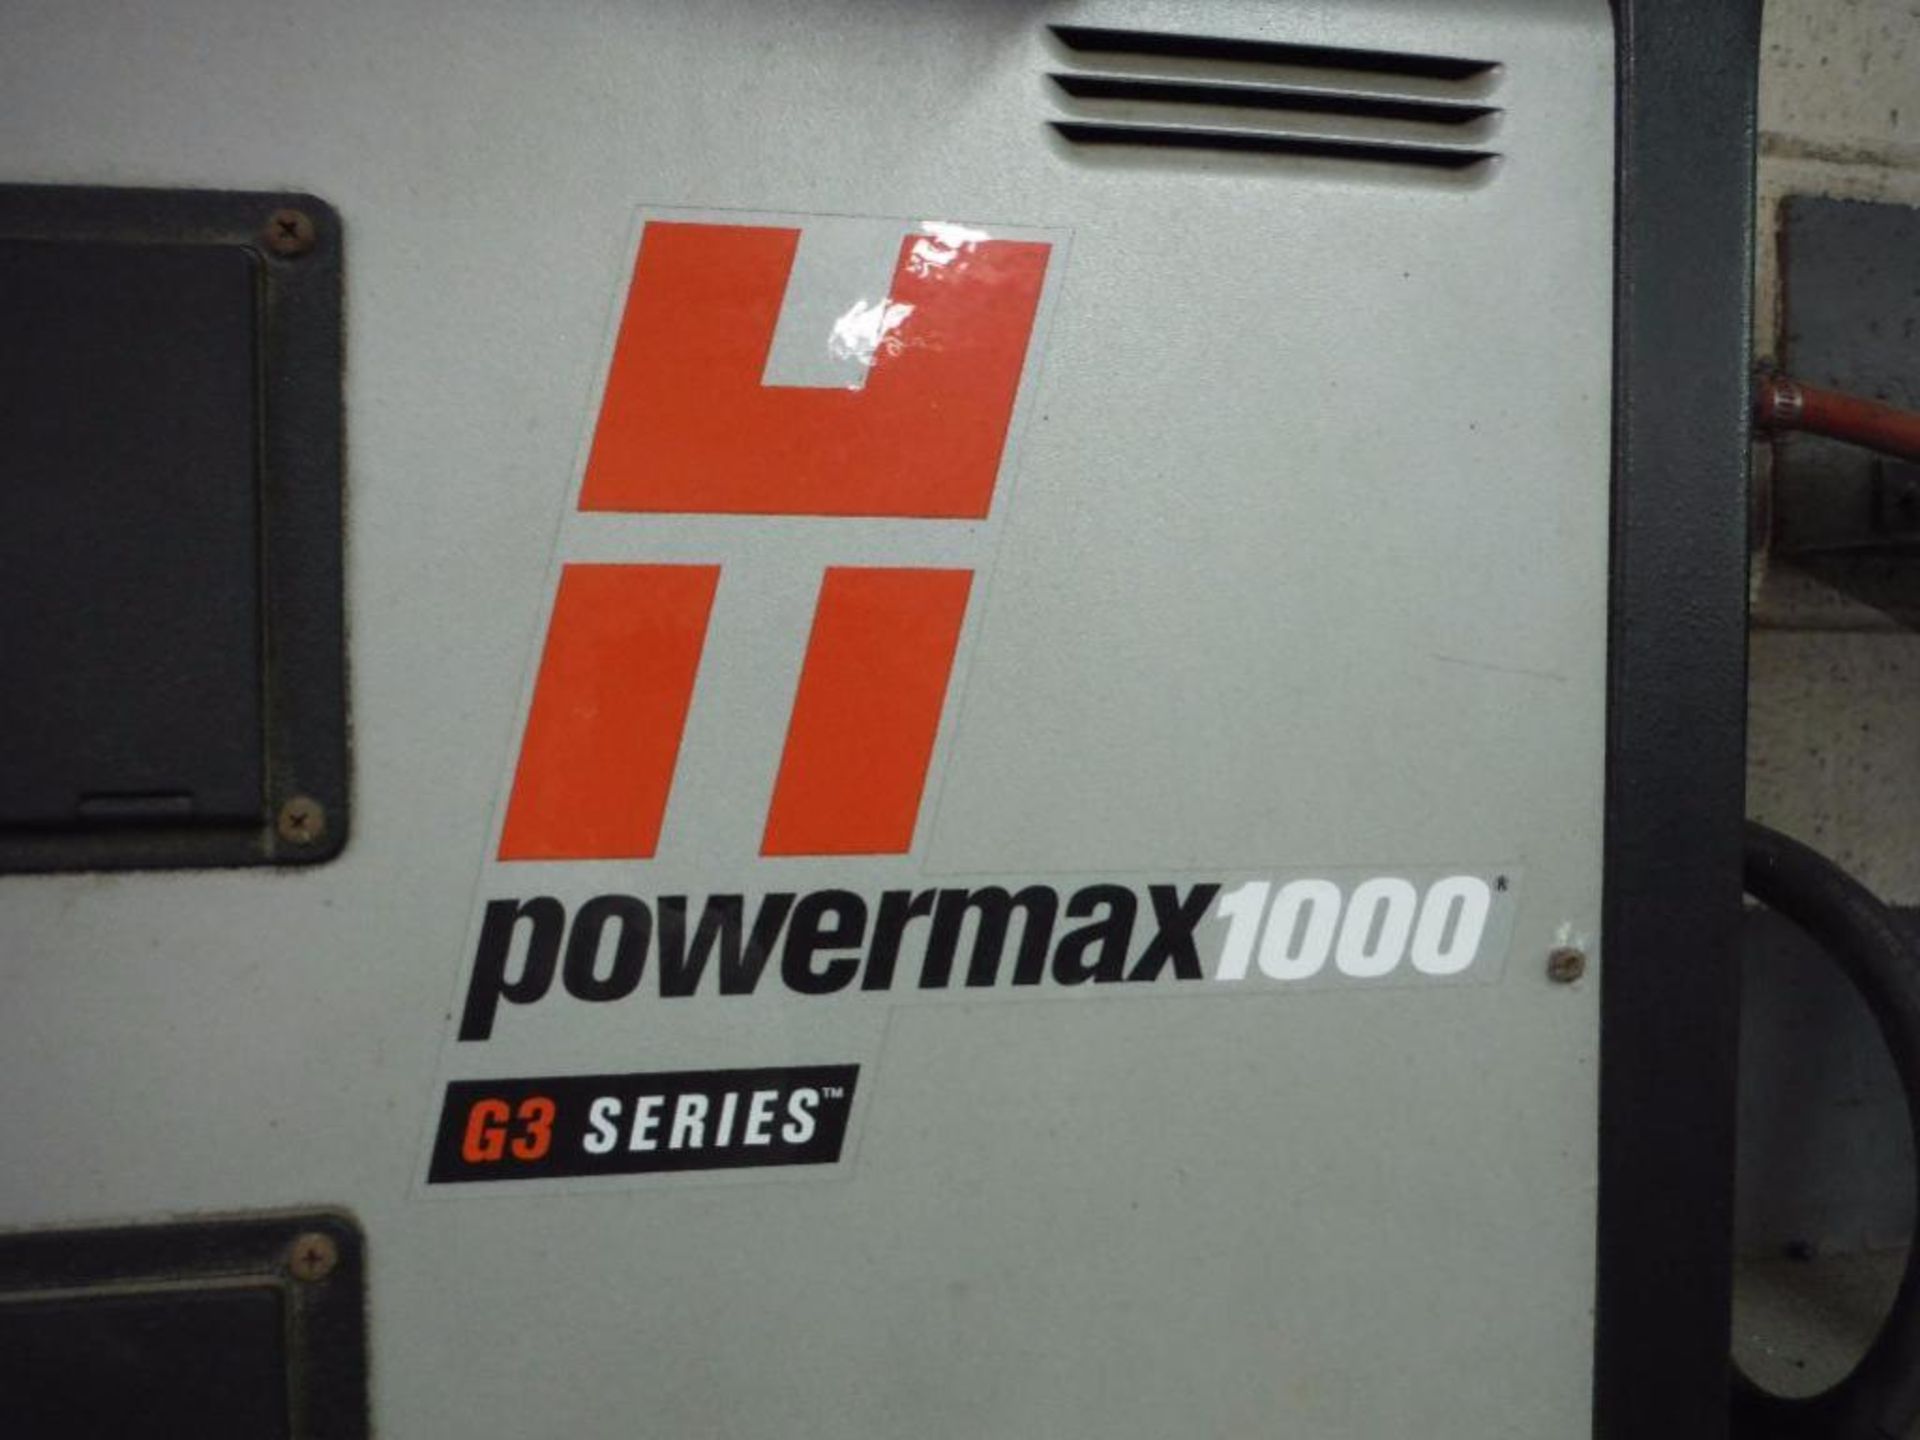 Hypotherm powermax1000 plasma cutter ** Rigging Fee: $15 ** - Image 5 of 7